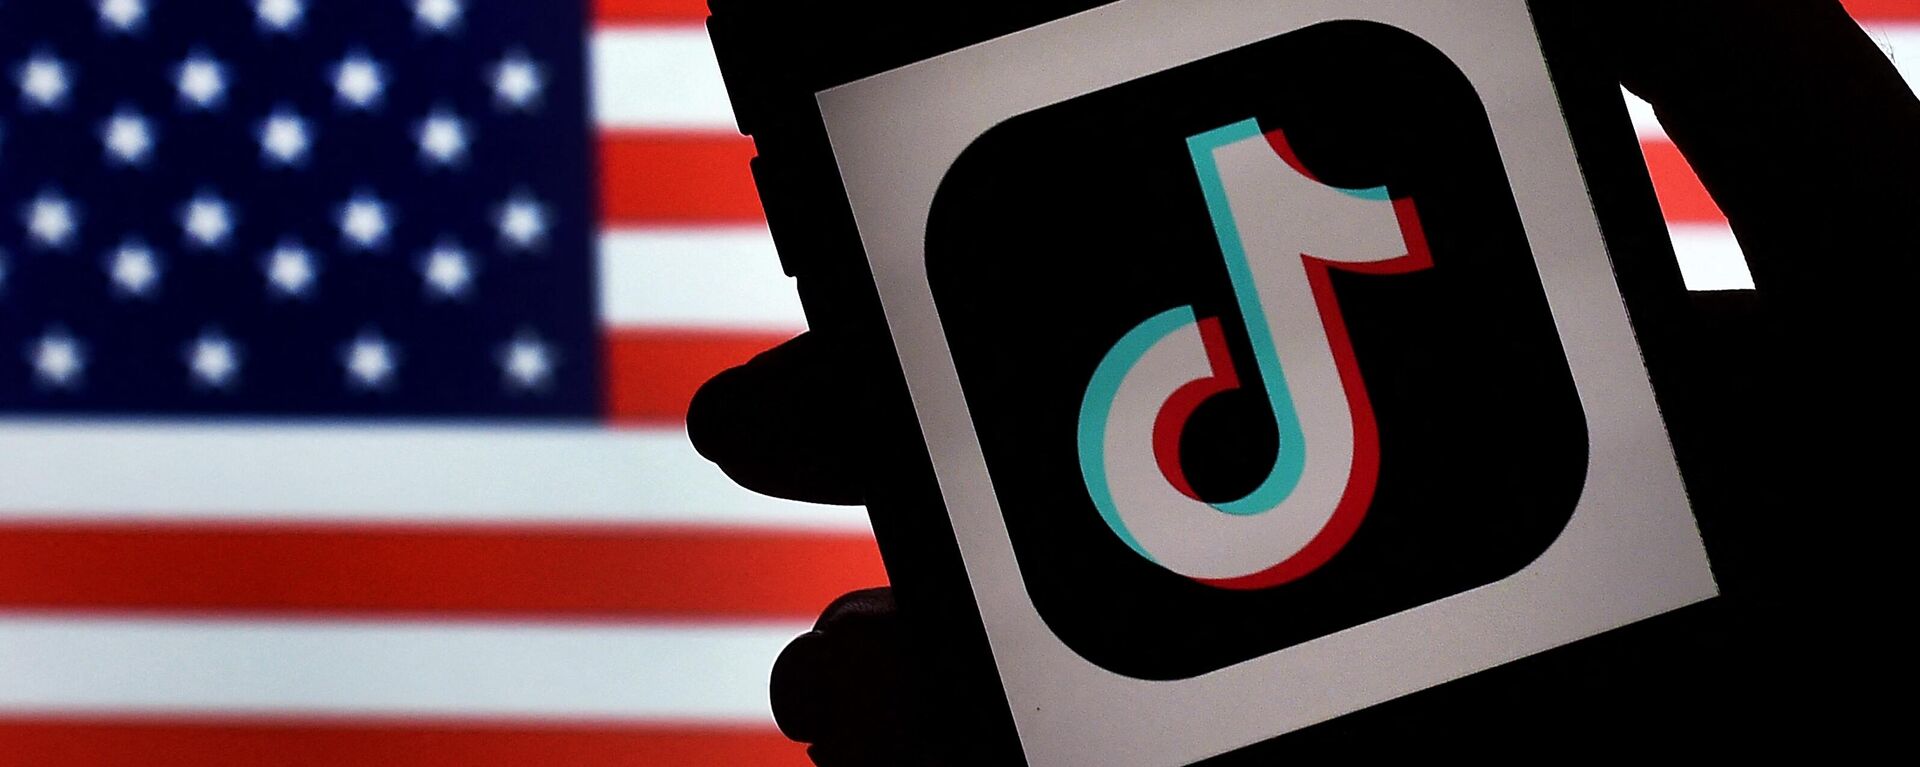 The social media application logo, TikTok is displayed on the screen of an iPhone on an American flag background.  - Sputnik International, 1920, 03.01.2023